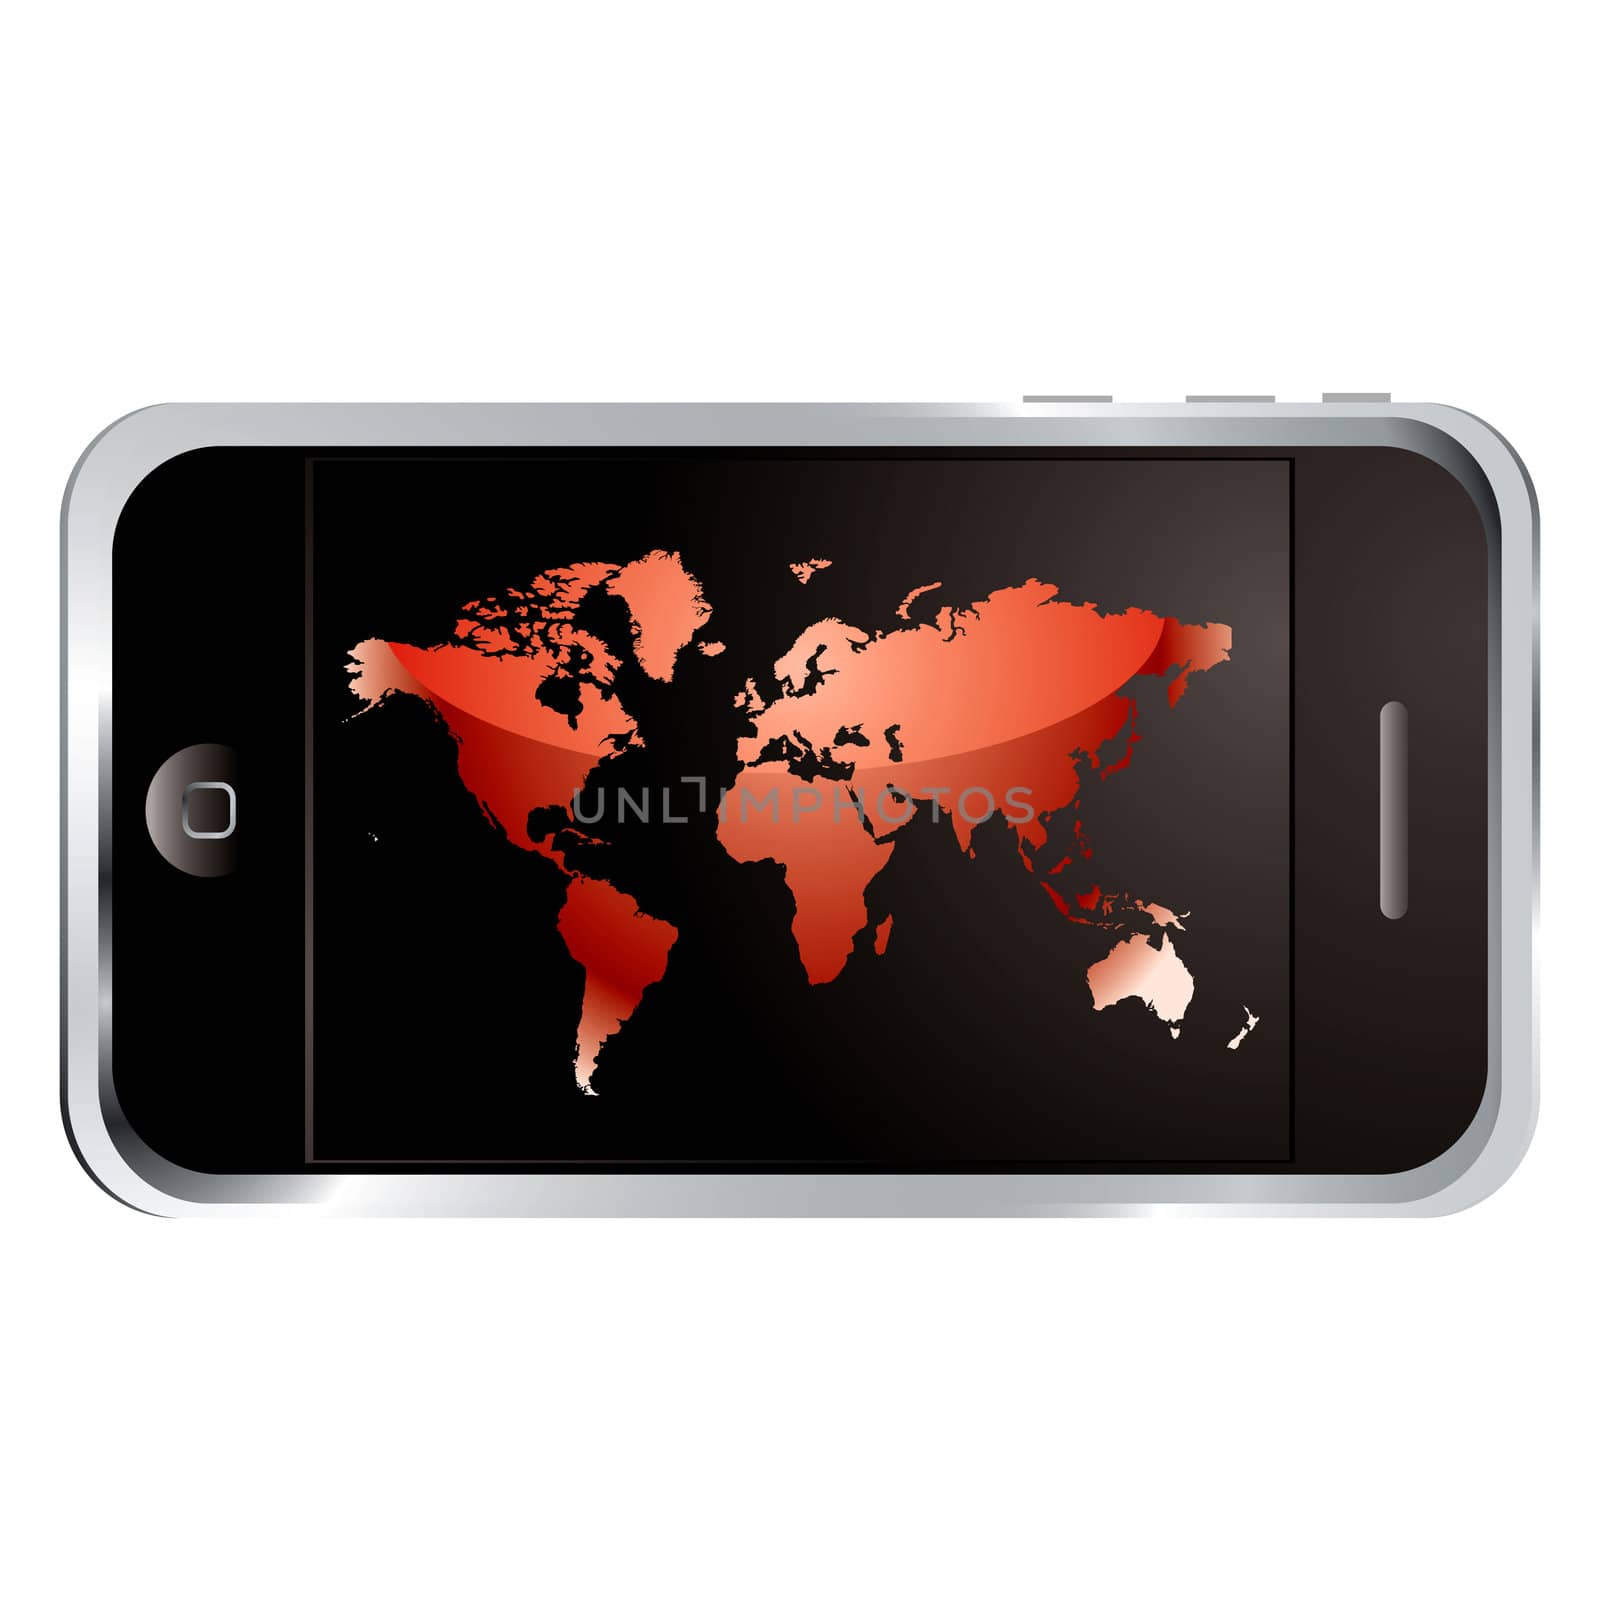 modern technology phone with large screen and world logo